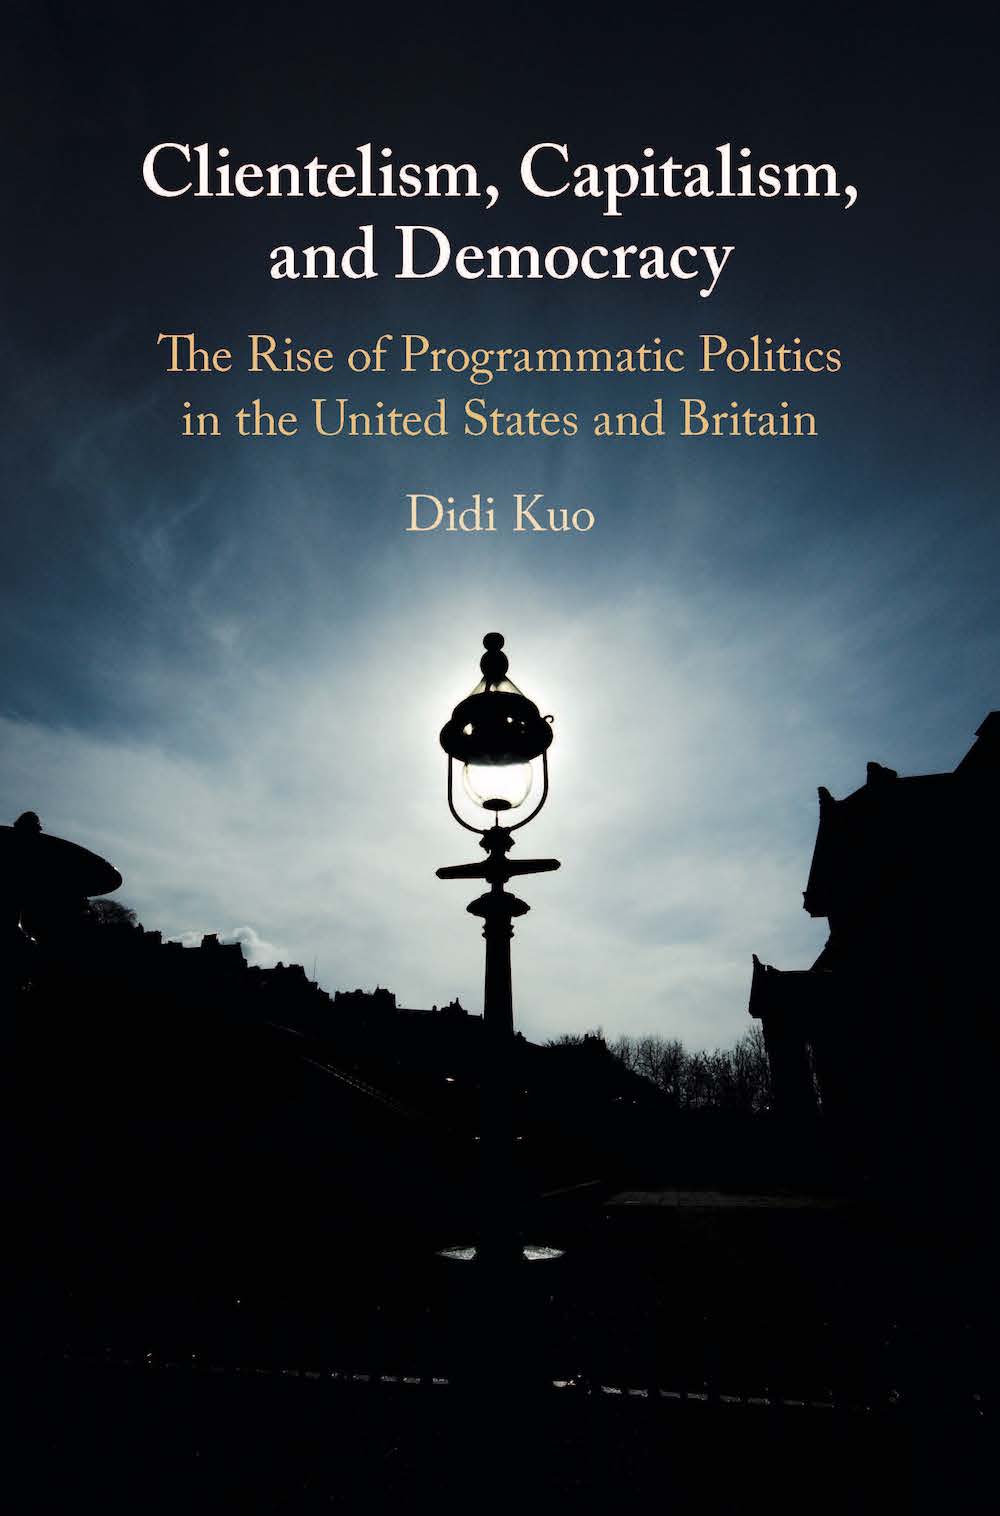 Clientelism, Capitalism, and Democracy book cover